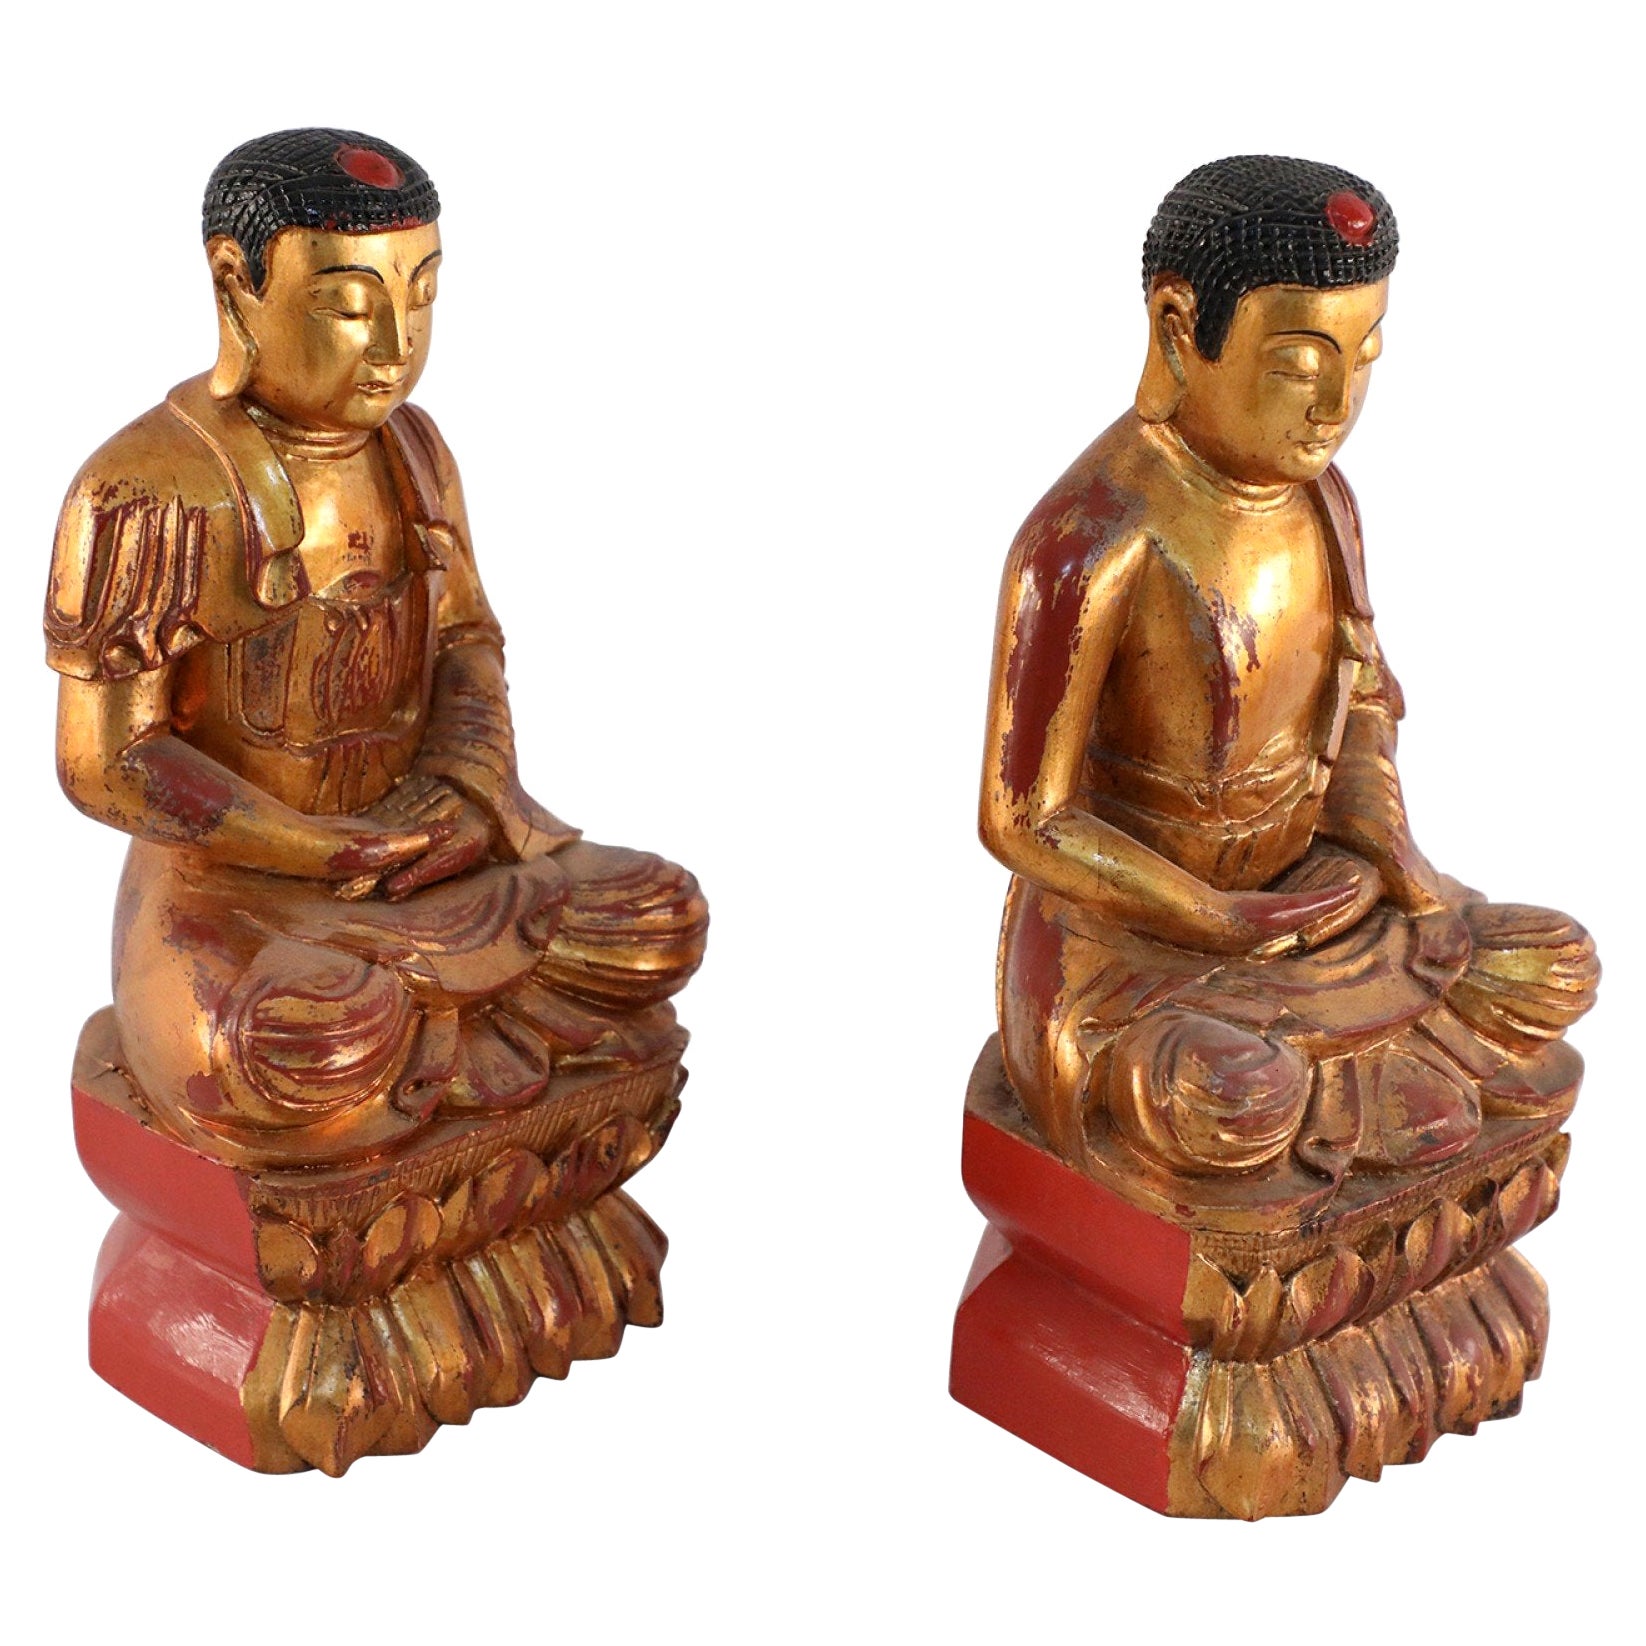 Pair of Chinese Gold Wooden Buddha Statues